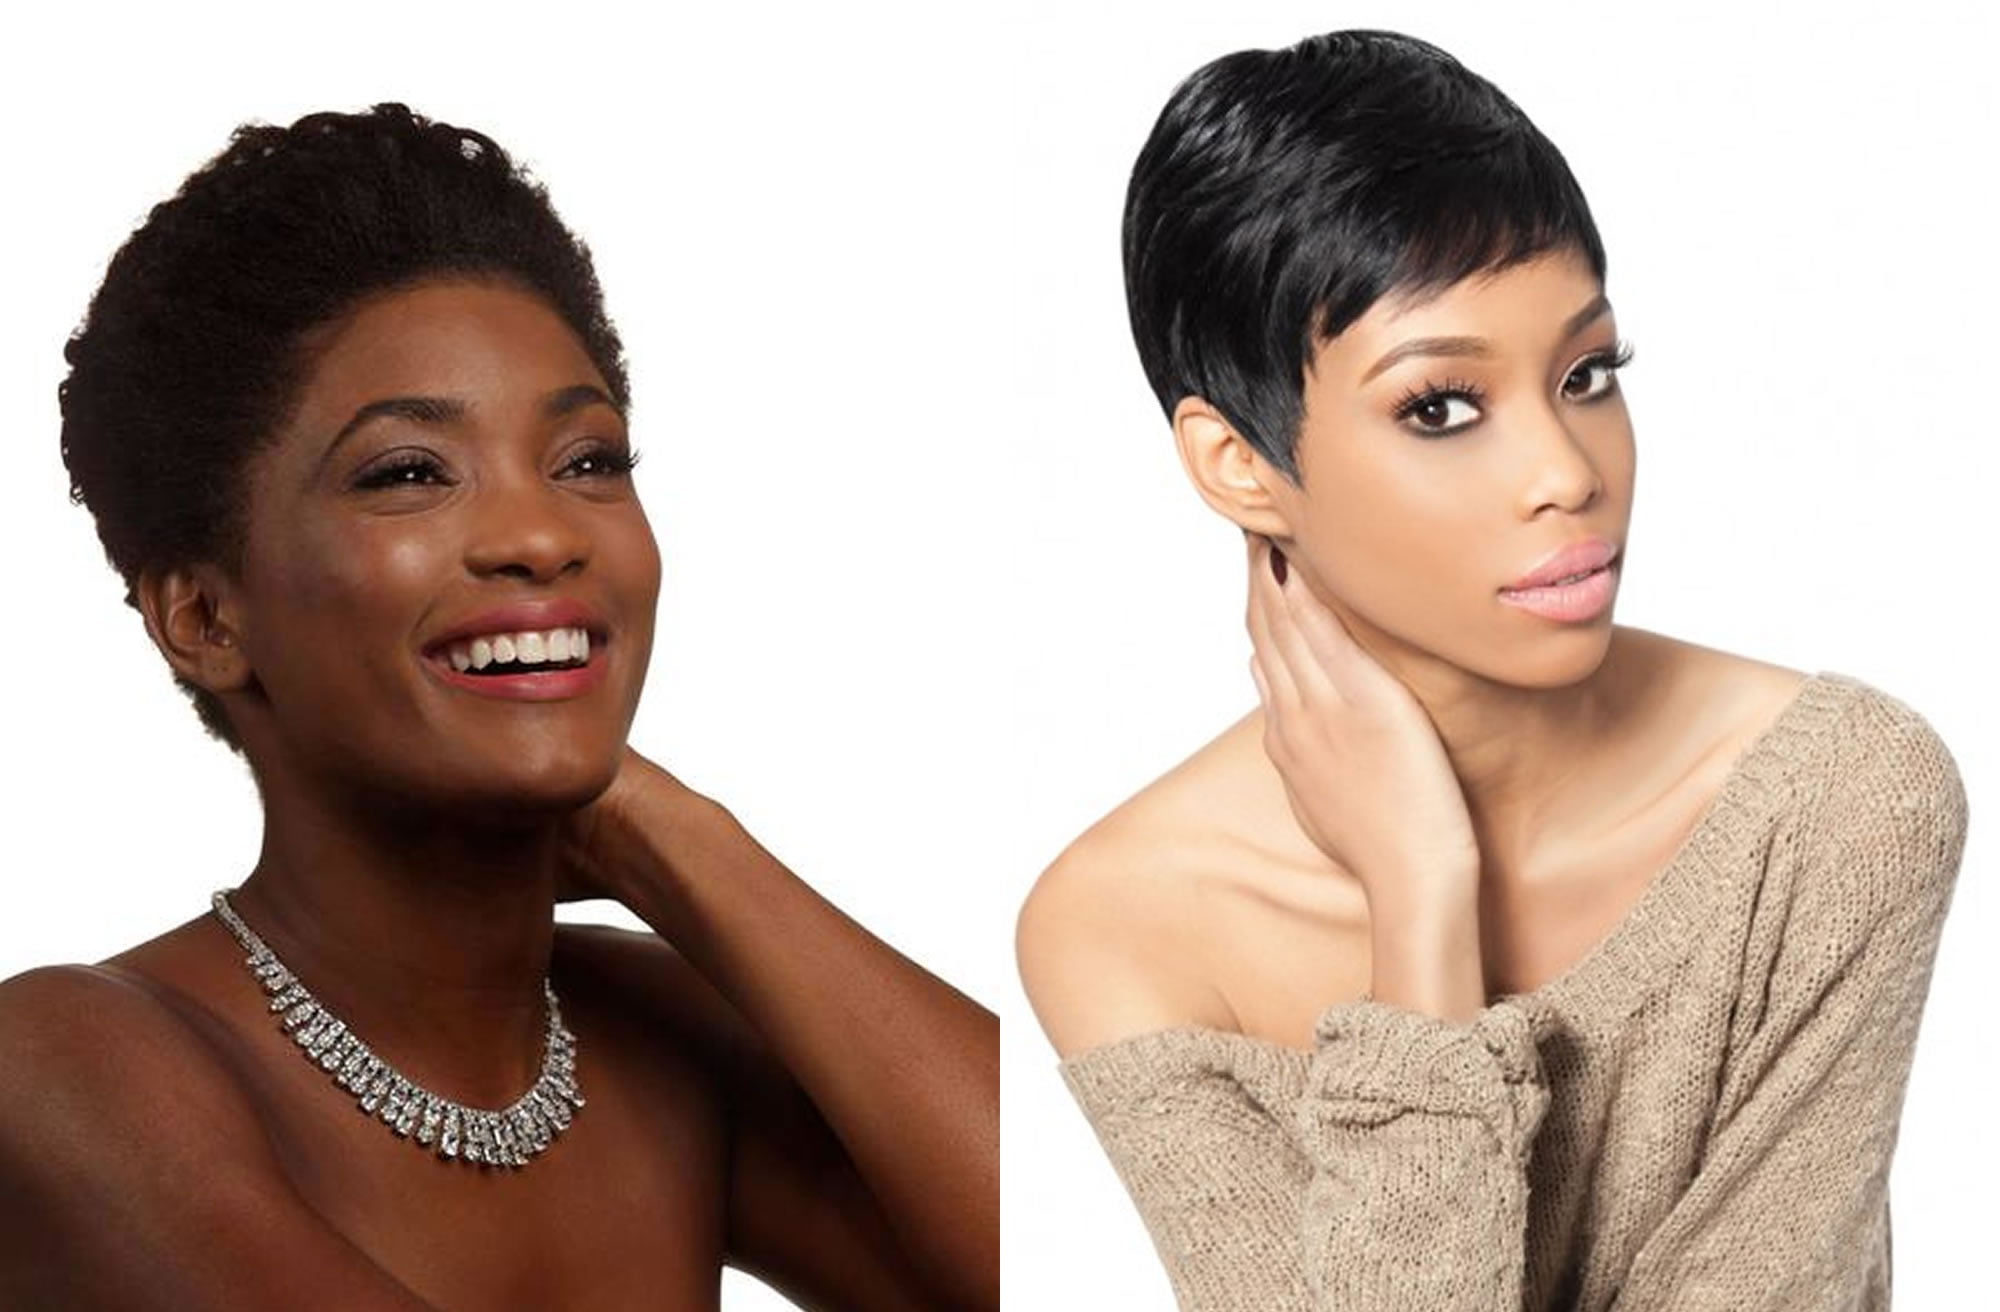 Pixie Hairstyles For Black Women 60 Cool Short Haircuts For 2017